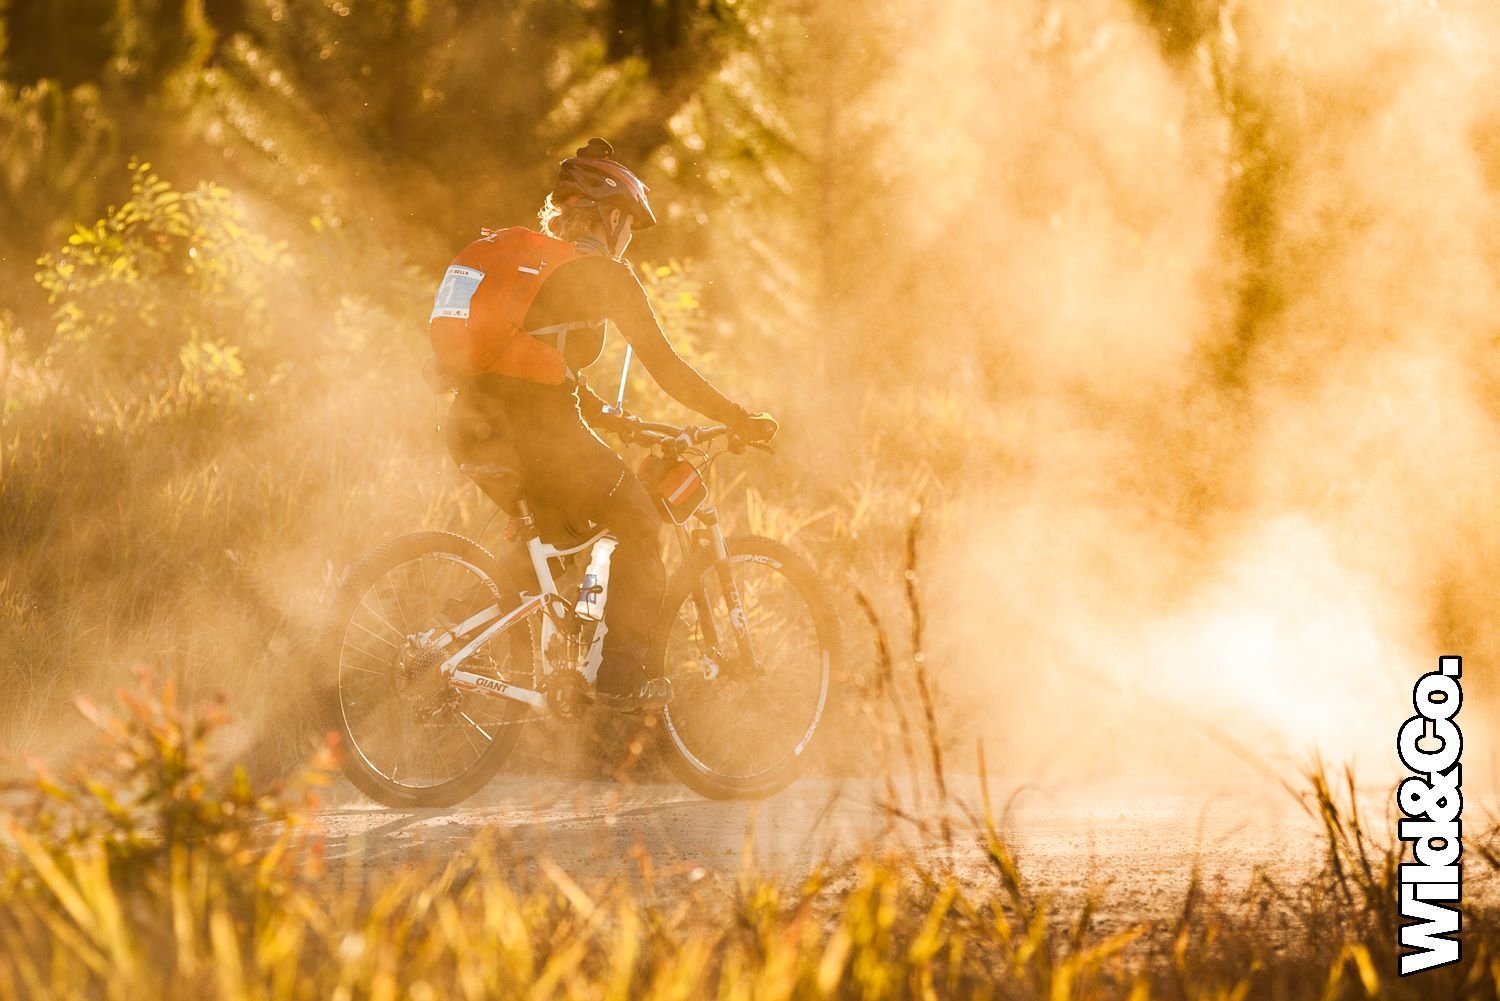 Some of our favourite images from Hells Bells ever

Shot by Michael Page and Erren Sieders &ndash; they absolutely nailed the golden hour images in the state forests near Cochin Creek. Was a real maze in there too with course setting supported by Dav